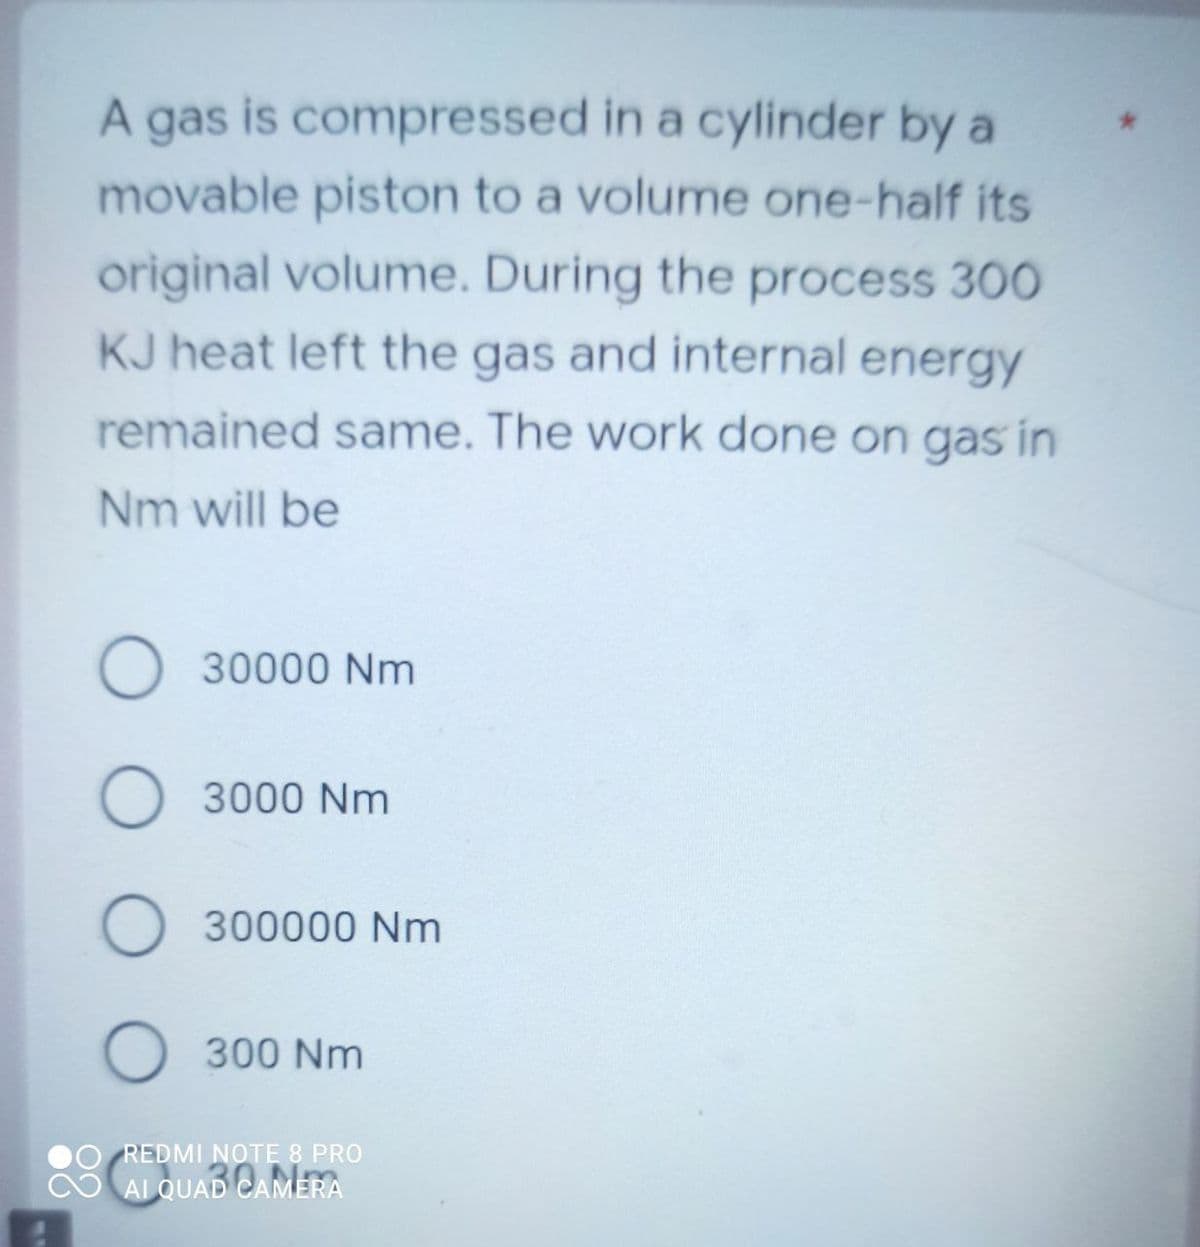 A gas is compressed in a cylinder by a
movable piston to a volume one-half its
original volume. During the process 300
KJ heat left the gas and internal energy
remained same. The work done on gas in
Nm will be
30000 Nm
3000 Nm
300000 Nm
300 Nm
REDMI NOTE 8 PRO
AL QUAD CAMERA
